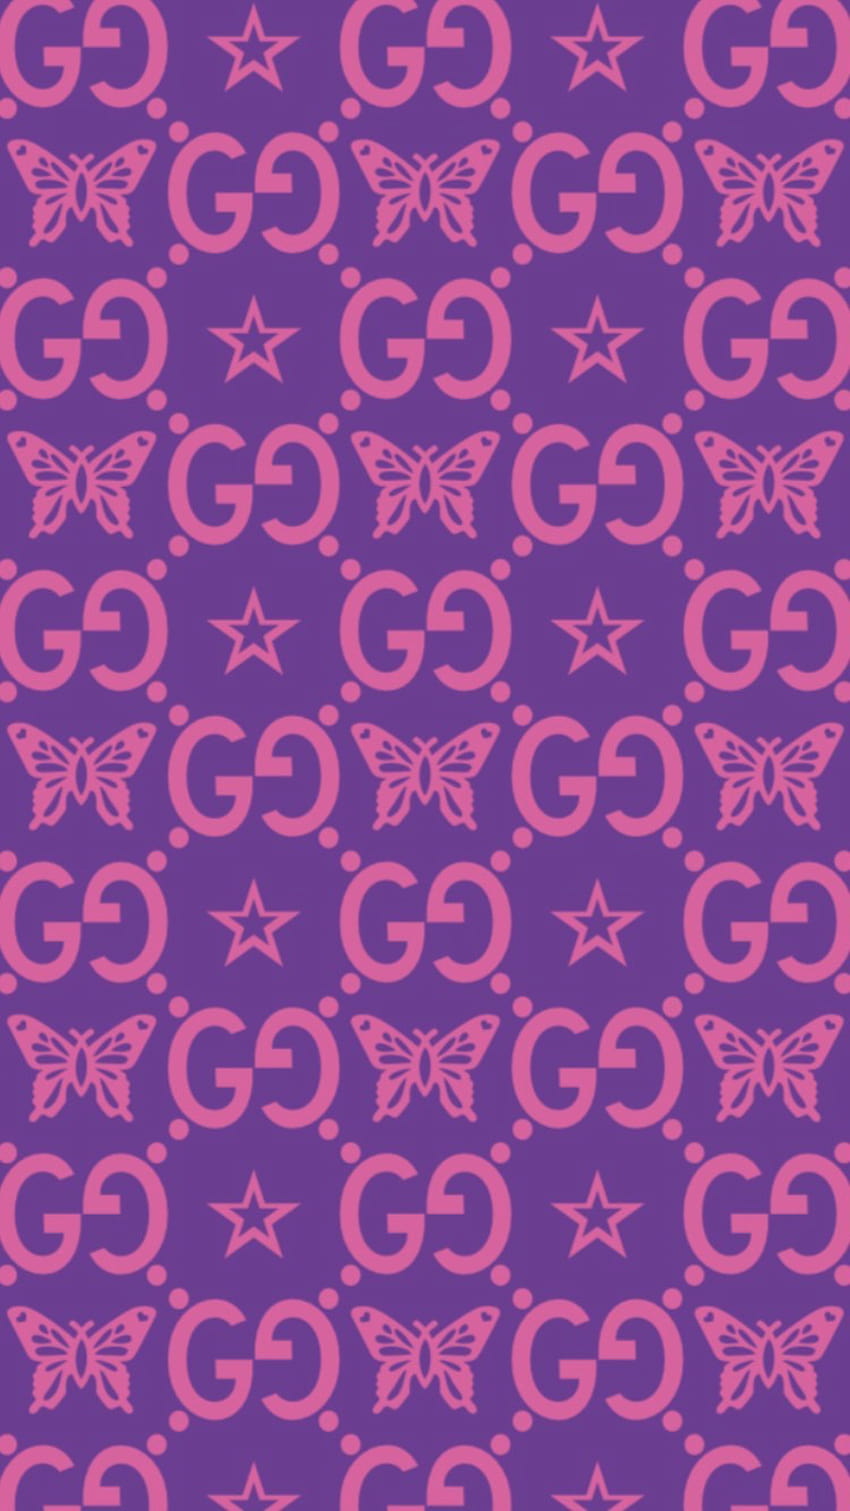 Stylish 999 Gucci background pink Free download high quality images